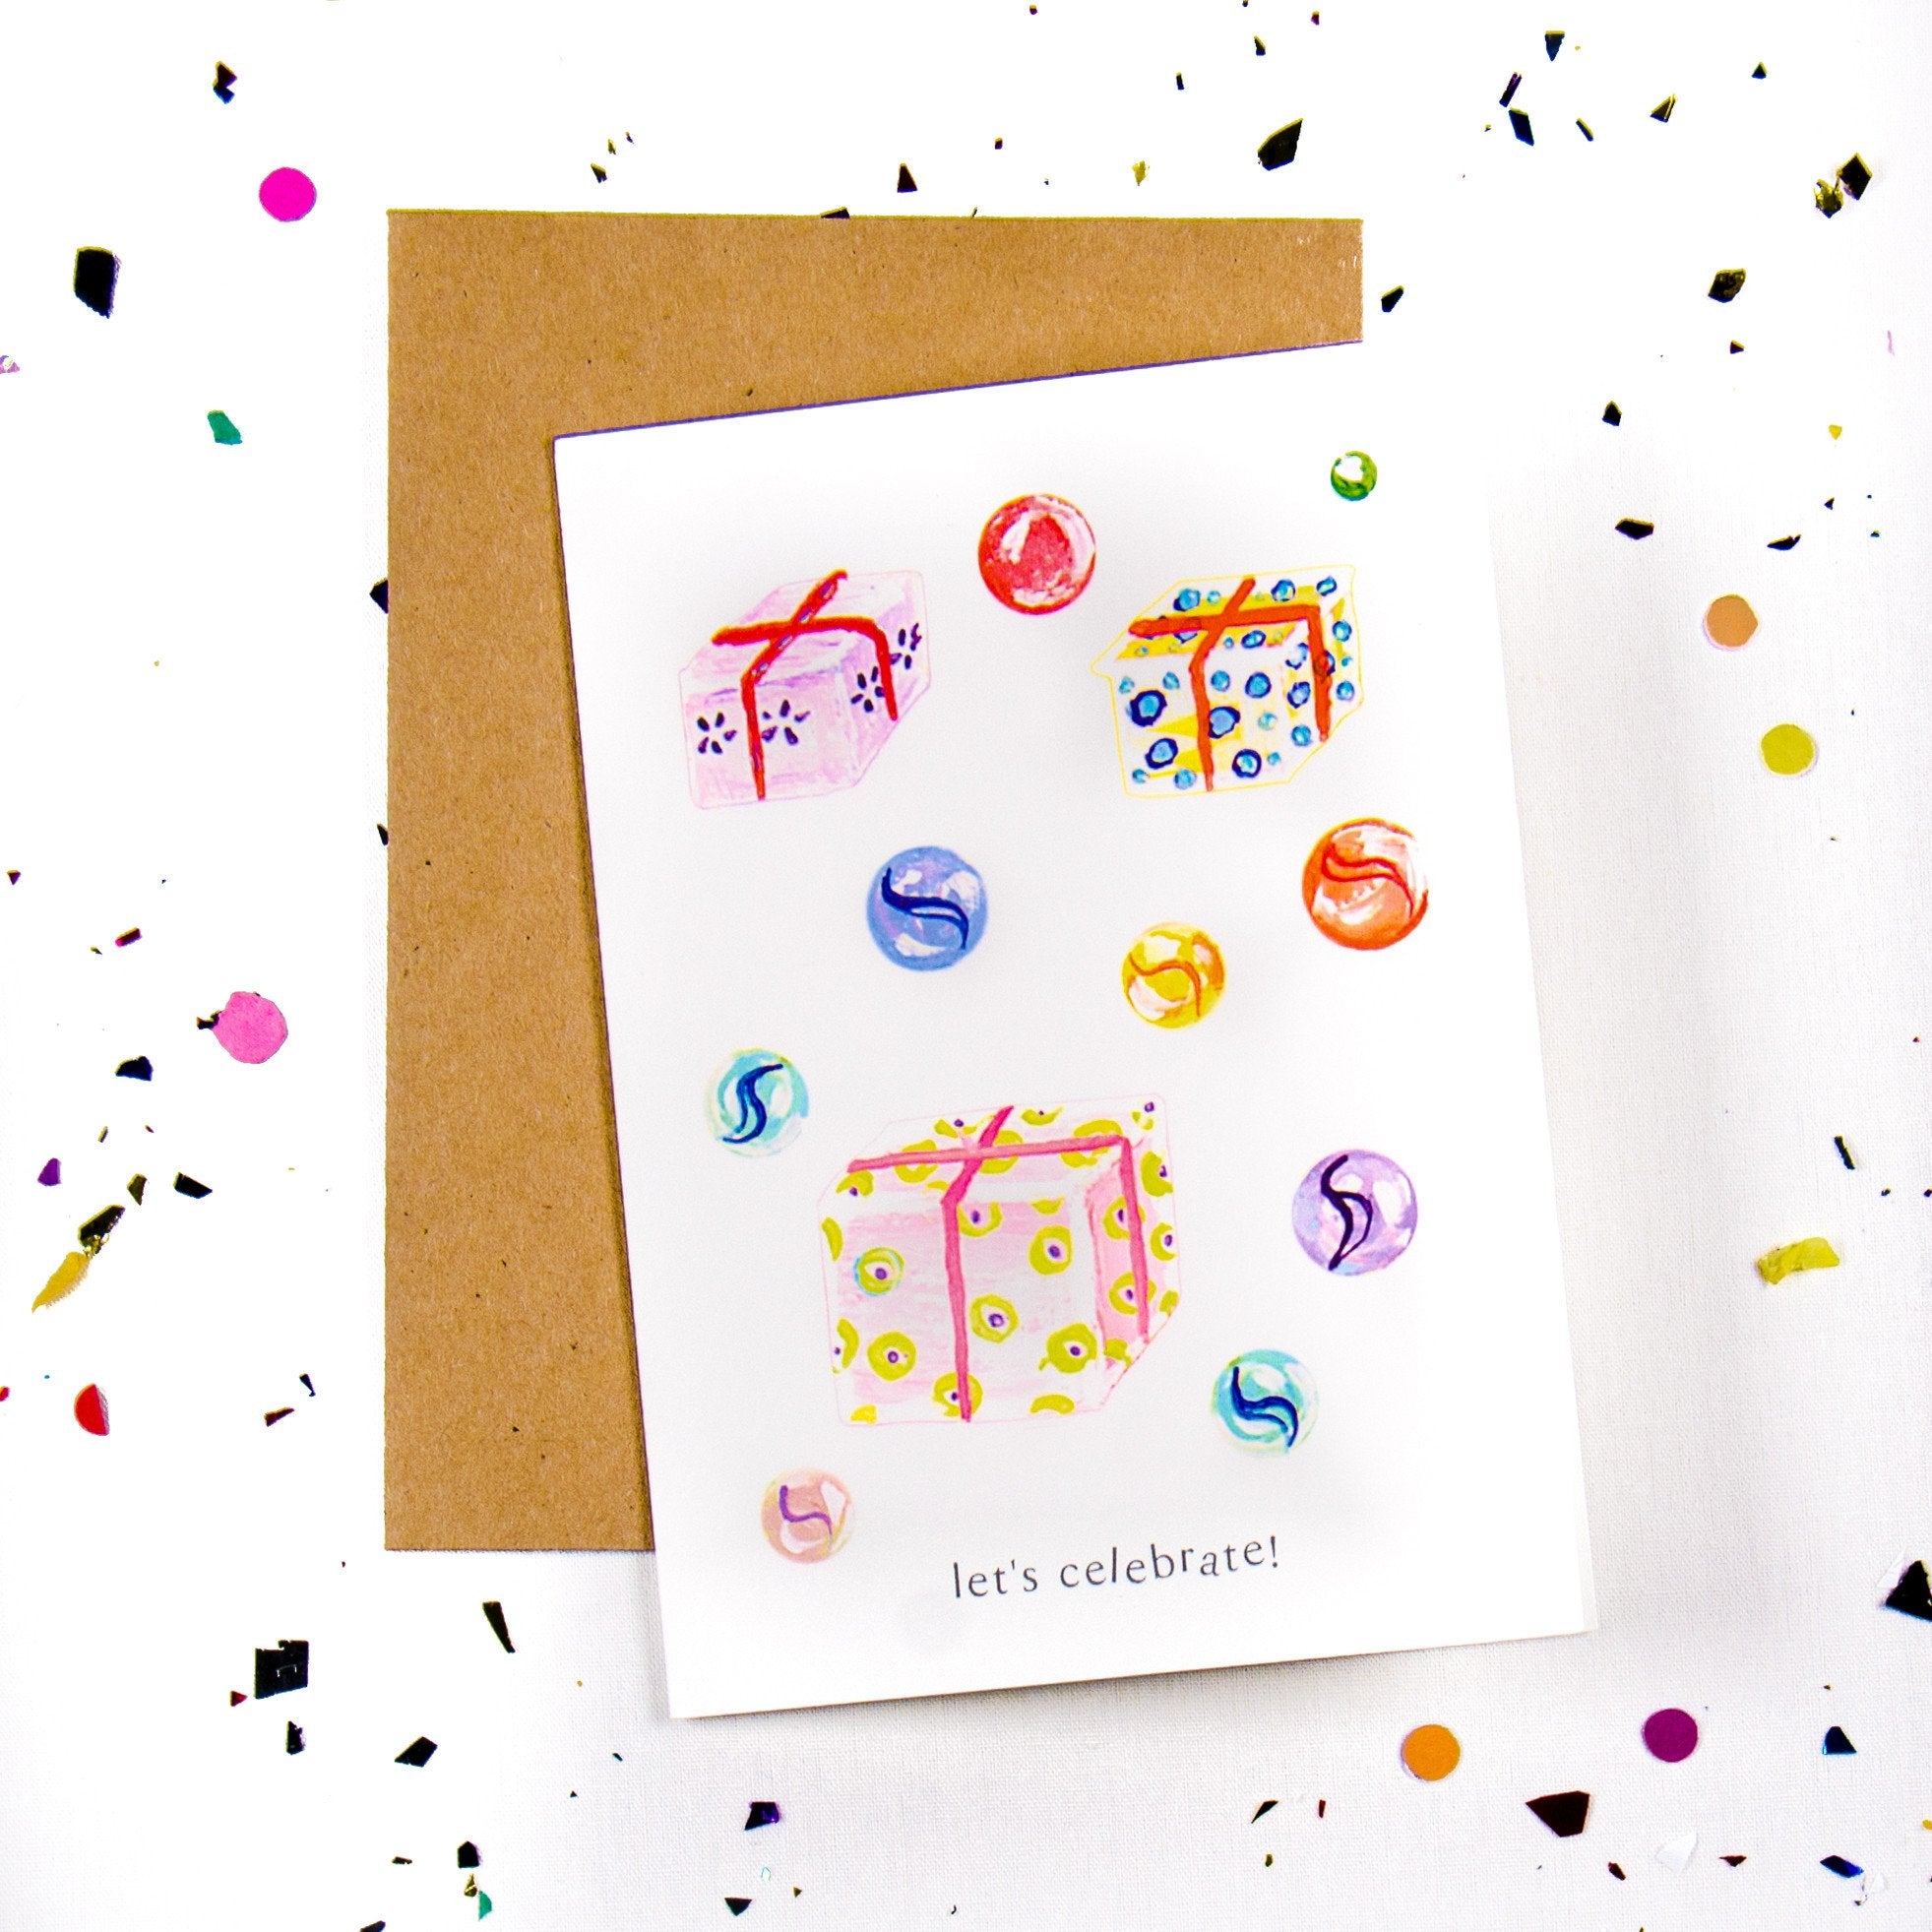 Let’s celebrate - Presents and Gifts Greeting Card